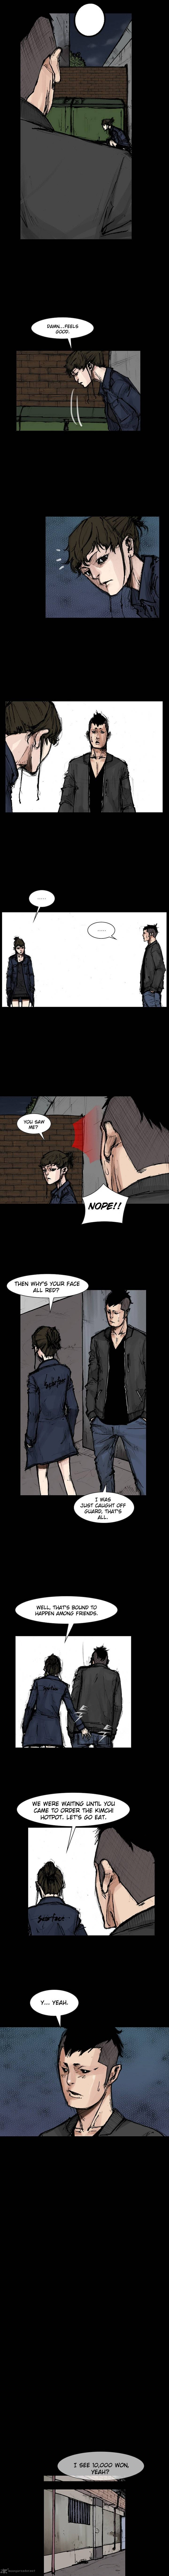 Dokgo 2 Chapter 55 Page 6